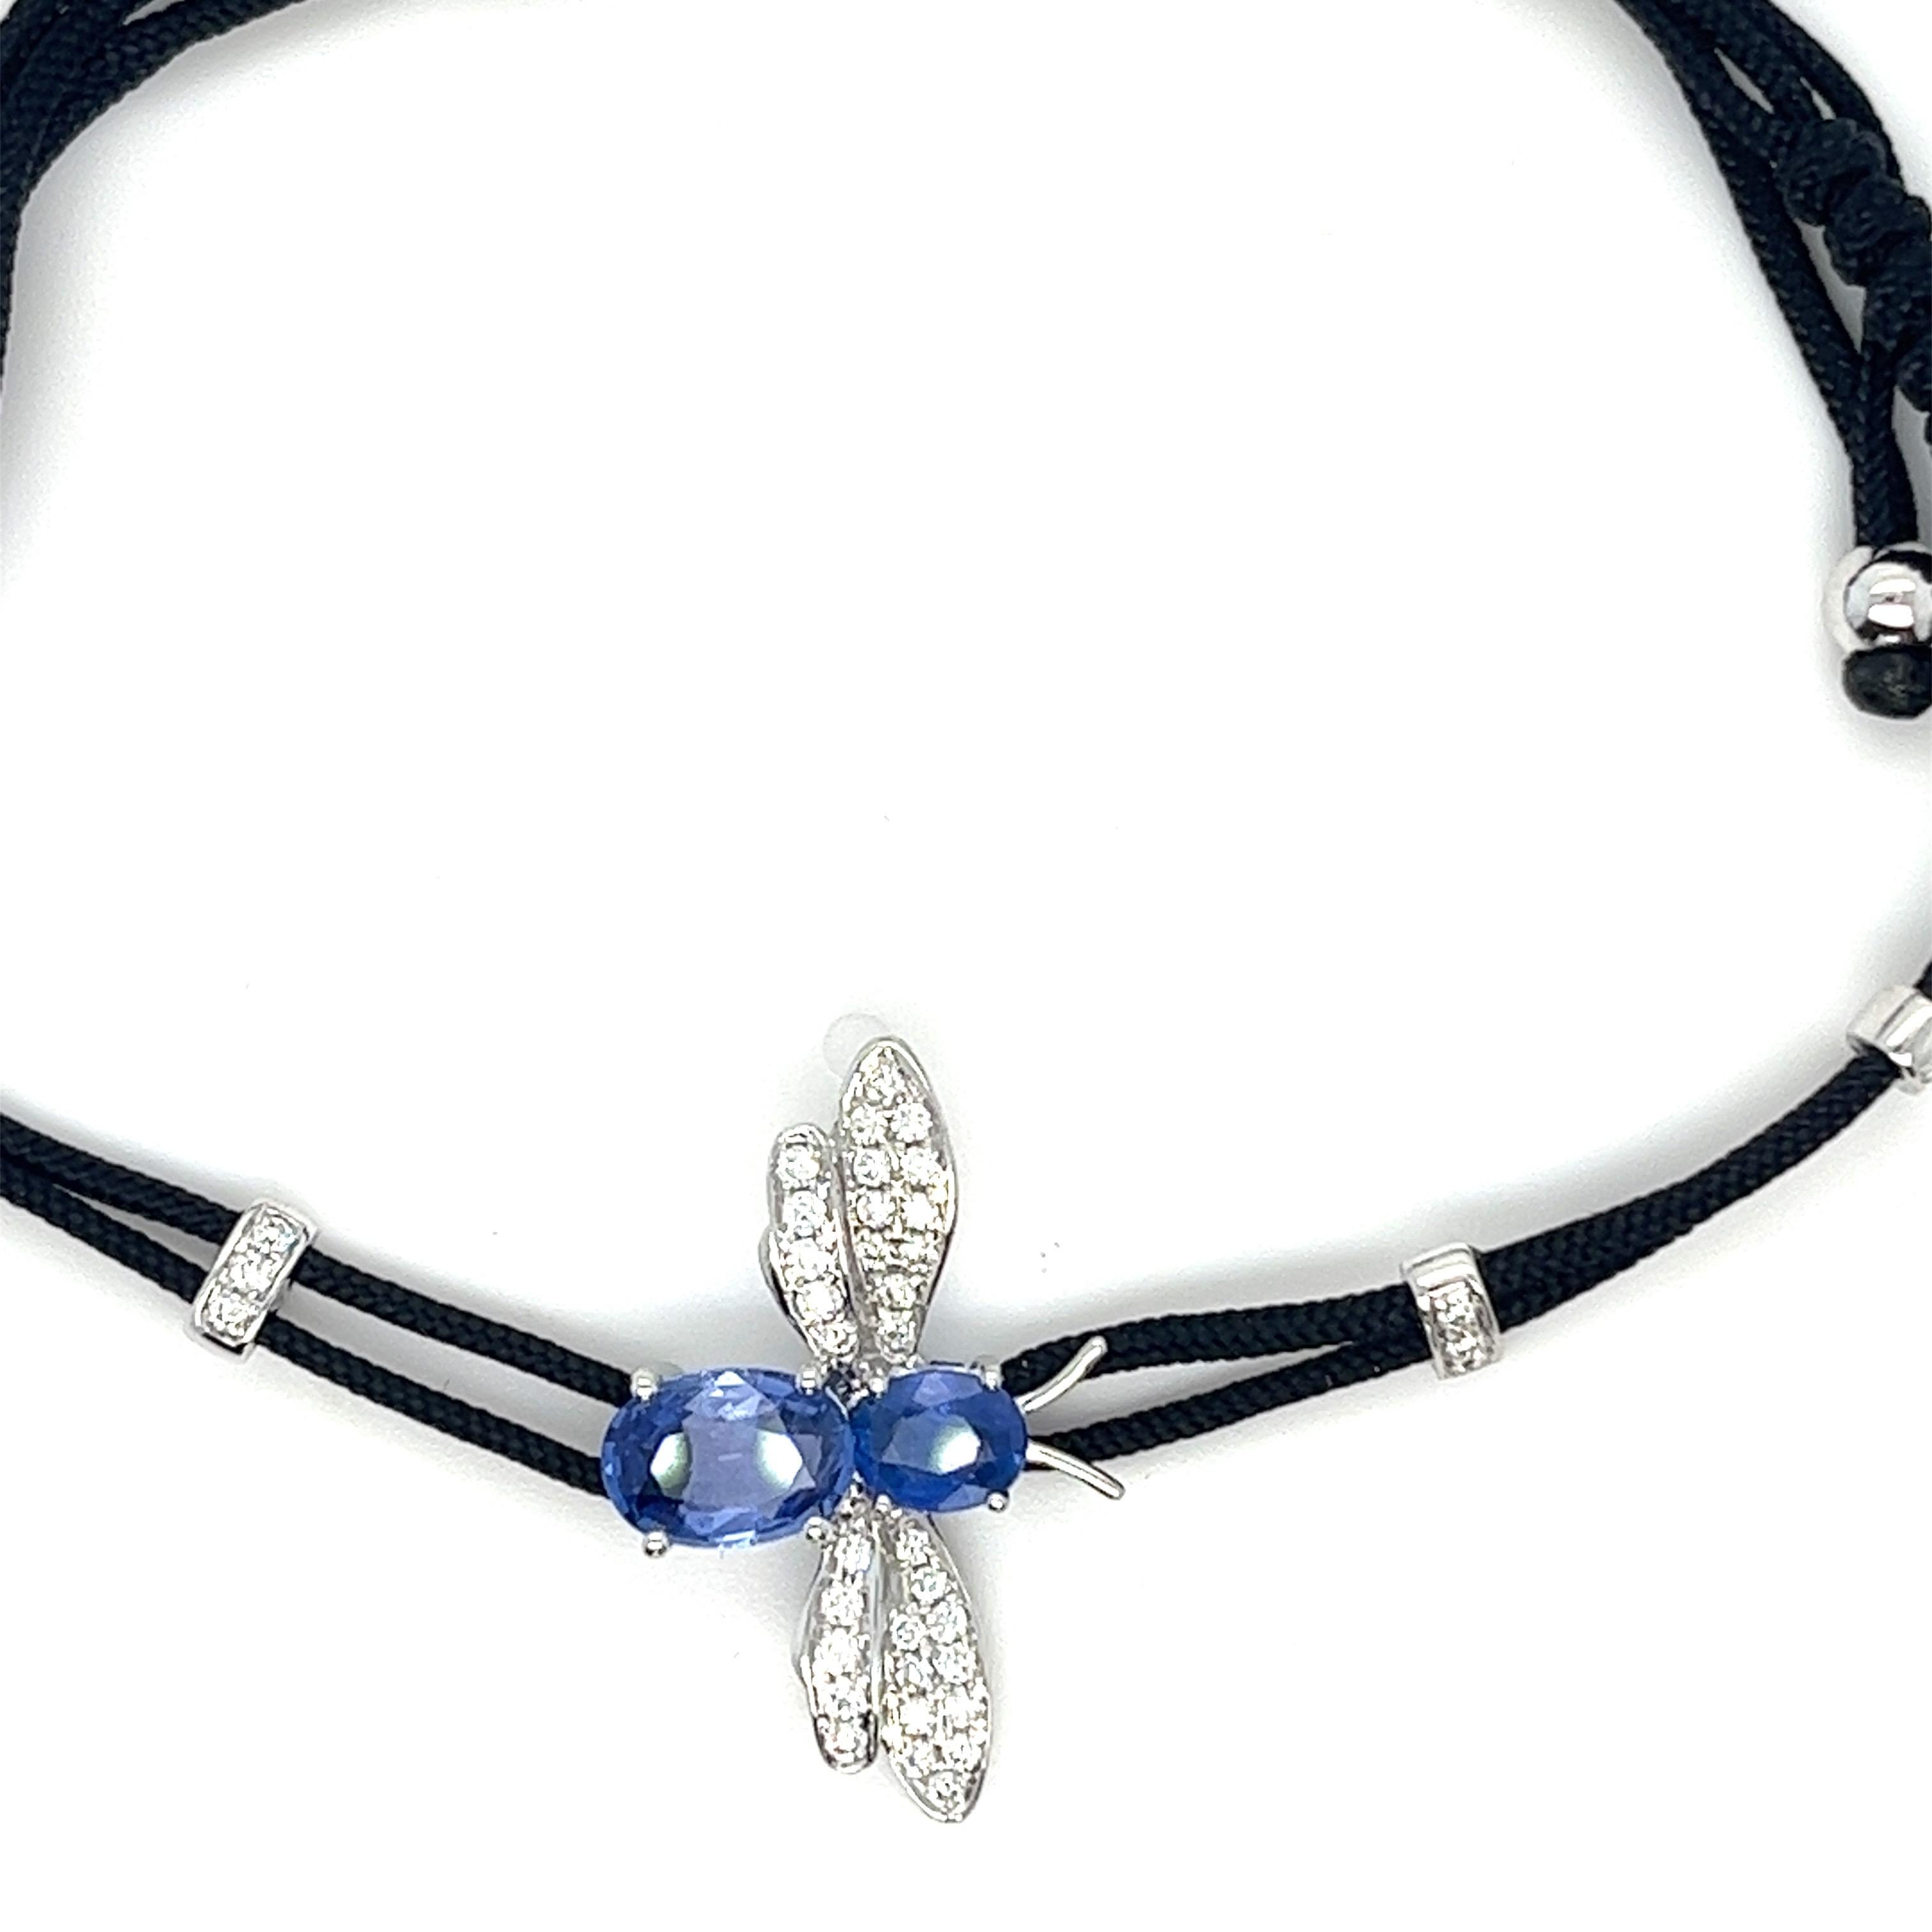 18K White Gold Bee Sapphire Woven Bracelet with Diamonds

44 Diamonds - 0.24 CT
2 Blue Sapphires - 1.21 CT
18K White Gold - 2.37 GM

This exquisite braided bracelet features a stunning bee made of sapphires, set in 18K gold, exuding an elegant